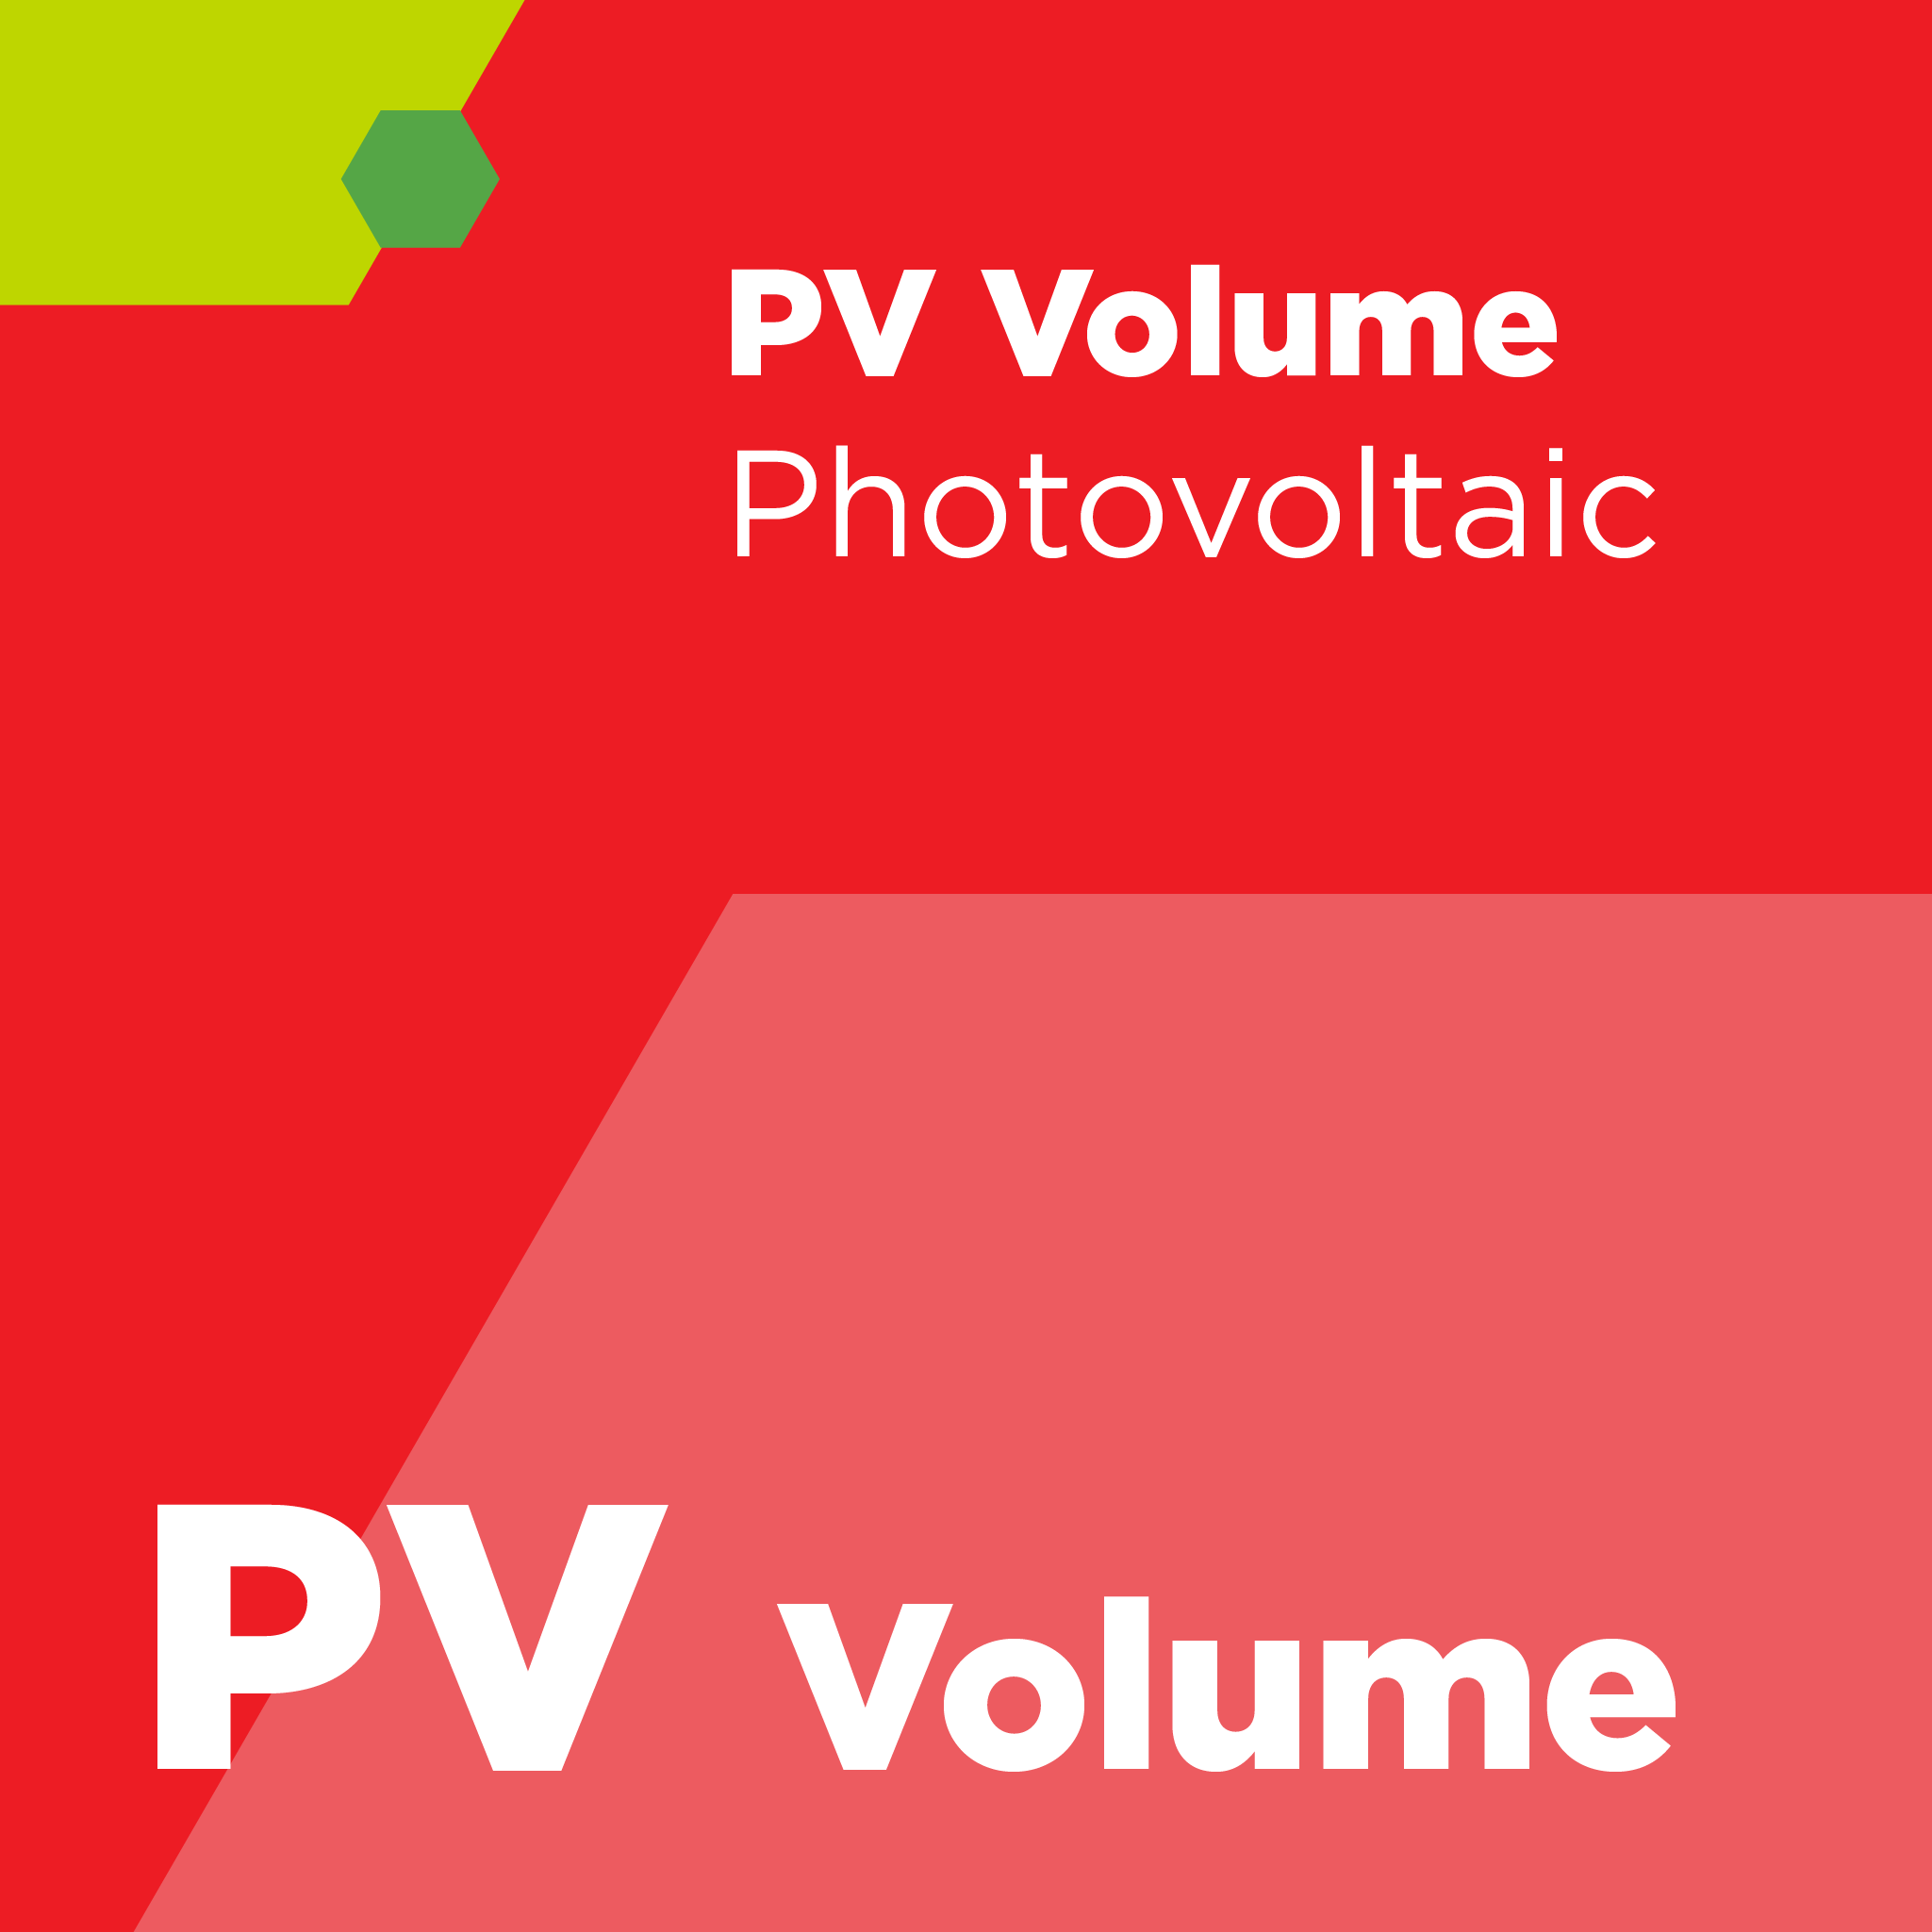 PV01700 - SEMI PV17 - Specification for Virgin Silicon Feedstock Materials for Photovoltaic Applications